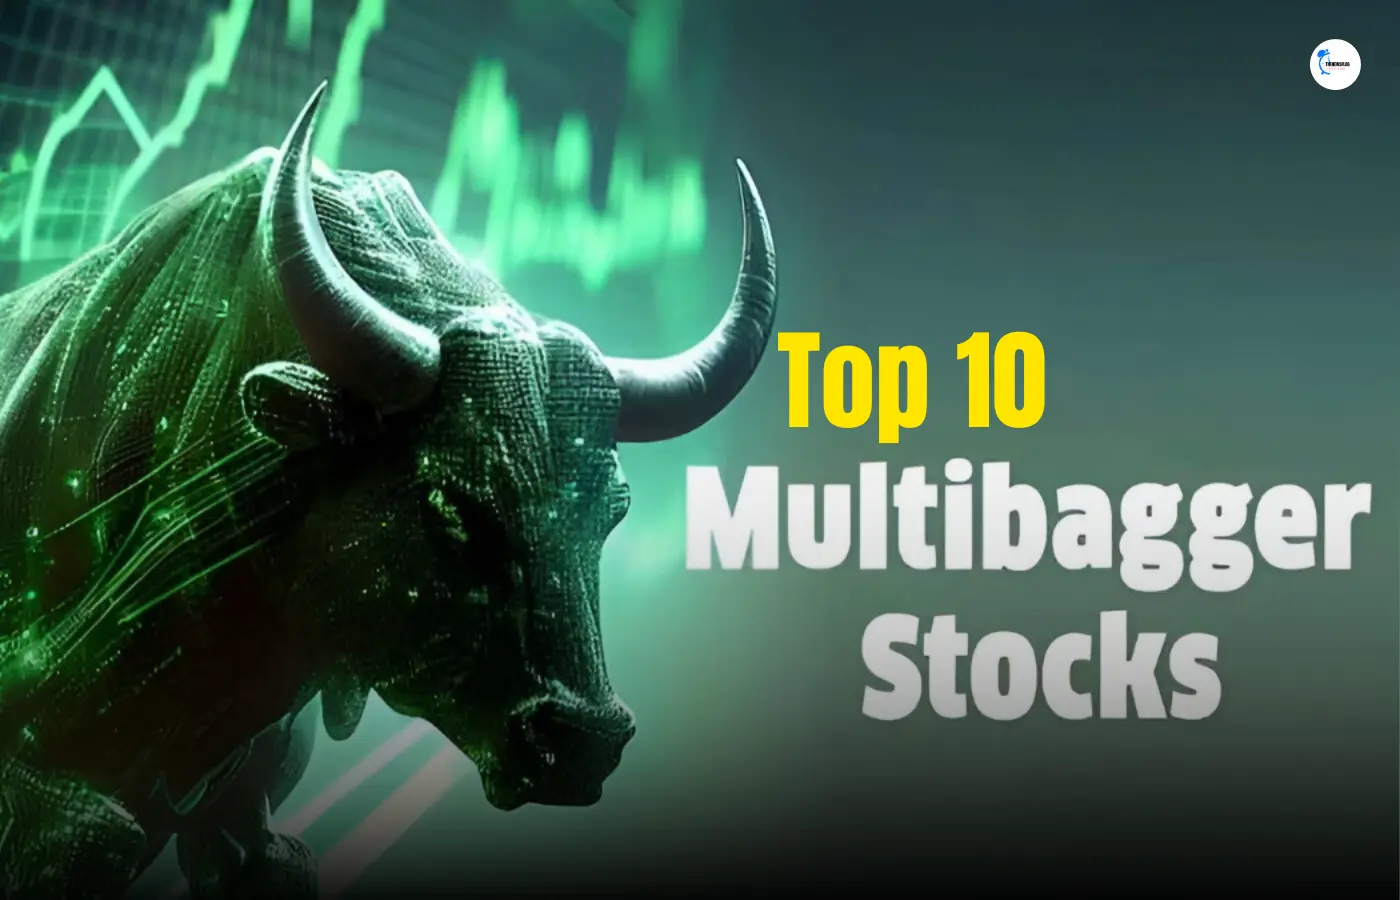 First 10 Multibagger Stocks of the year in india